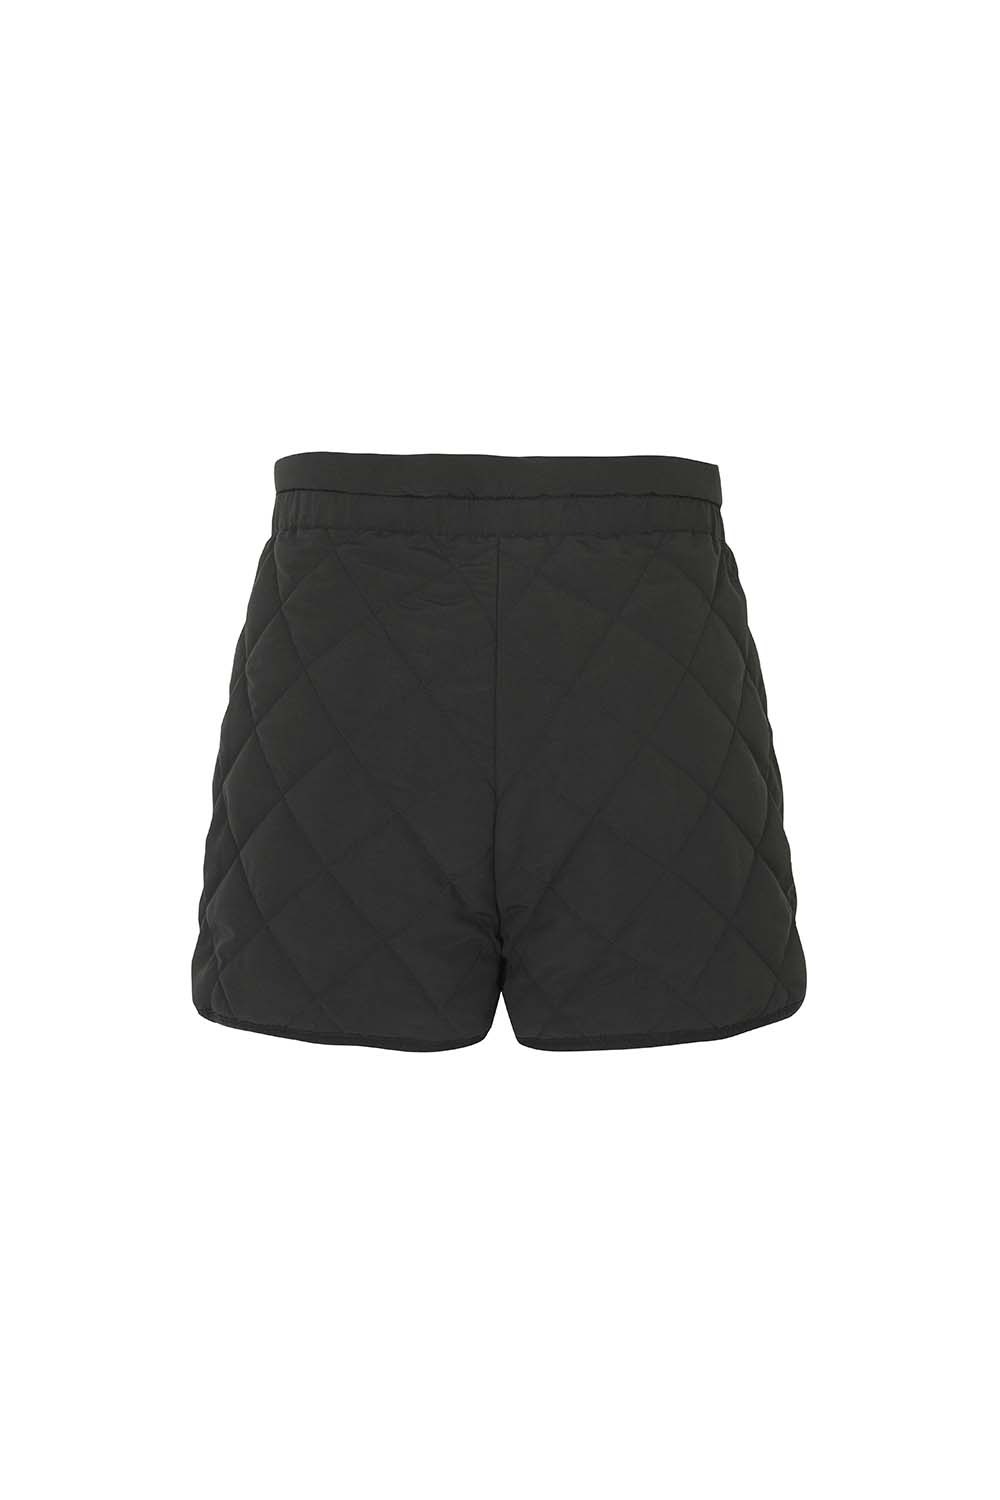 3M THINSULATE DOLPHIN SHORTS_Black